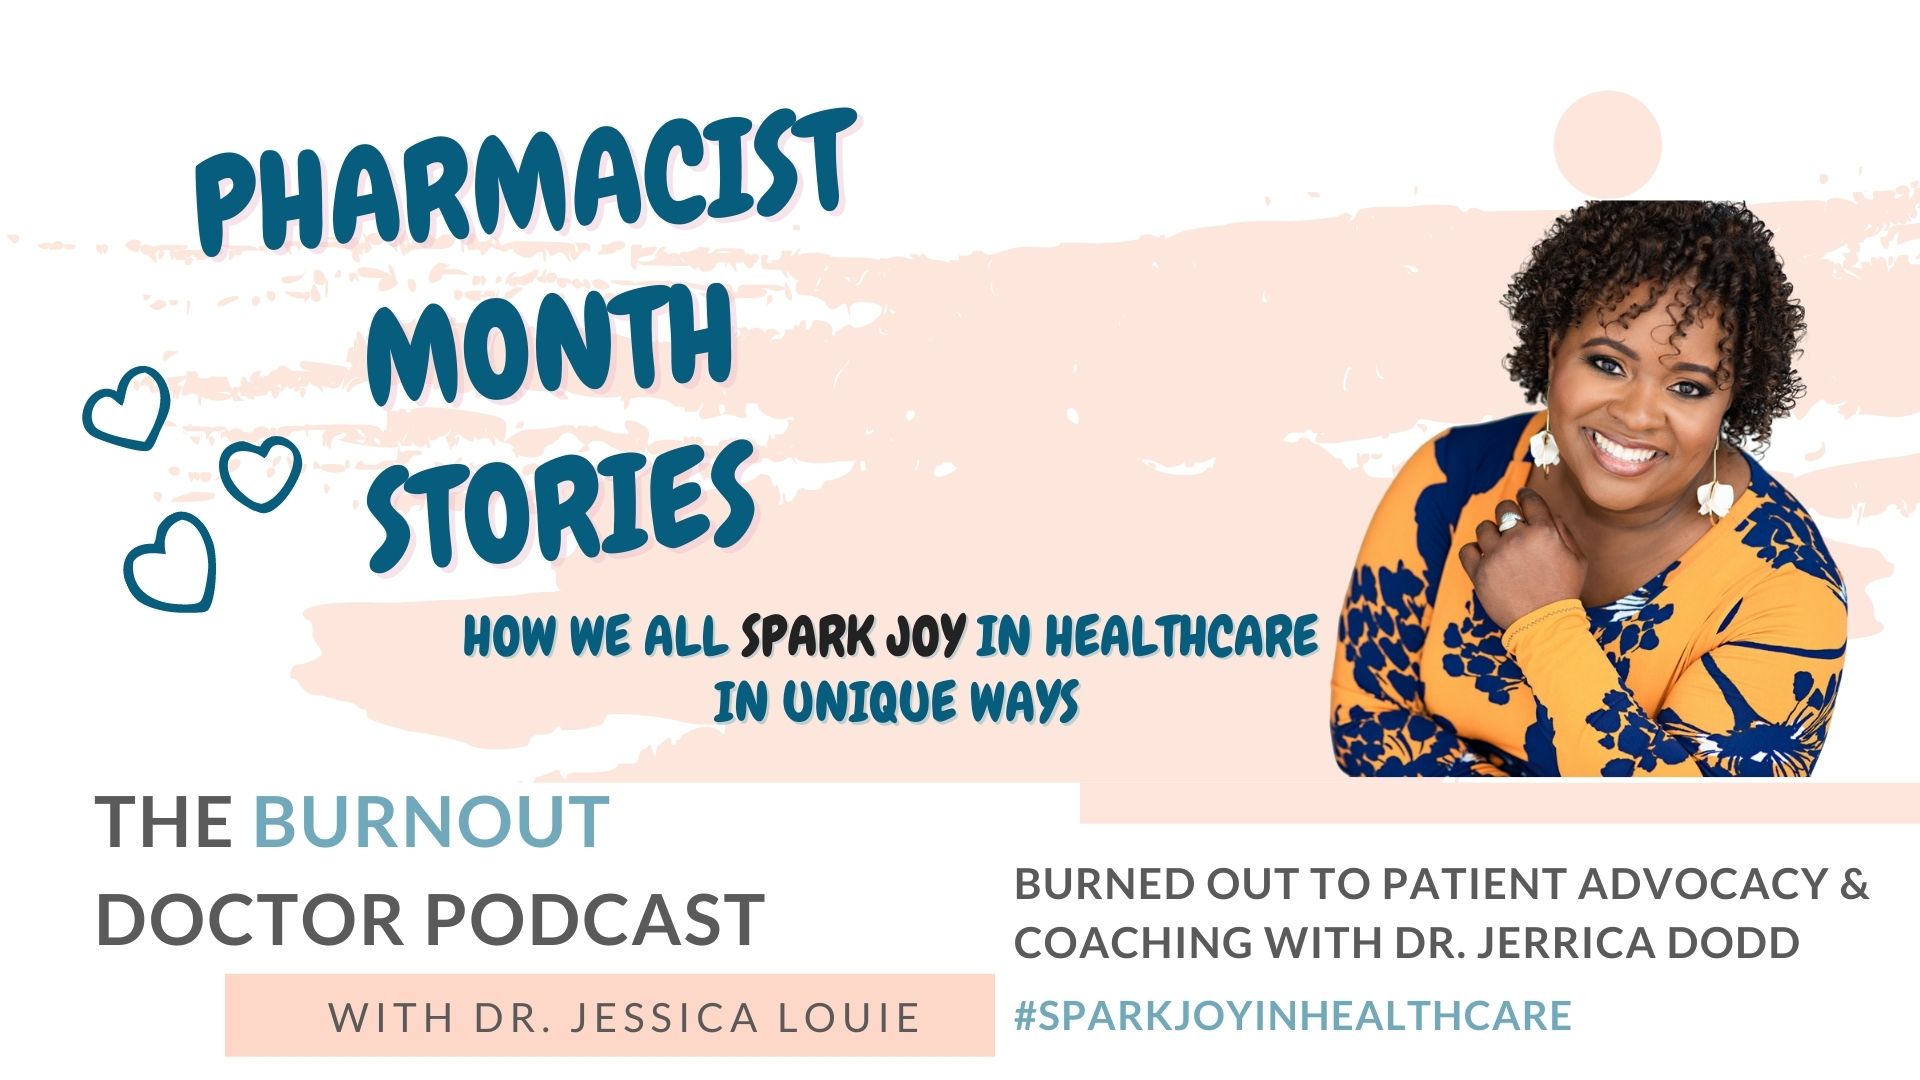 Dr. Jerrica Dodd on The Burnout Doctor Podcast. Pharmacist burnout stories with Dr. Jessica Louie. Your Pharmacist Advocate. Spark Joy in Healthcare. Joy at Work. KonMari Simplifying in healthcare.